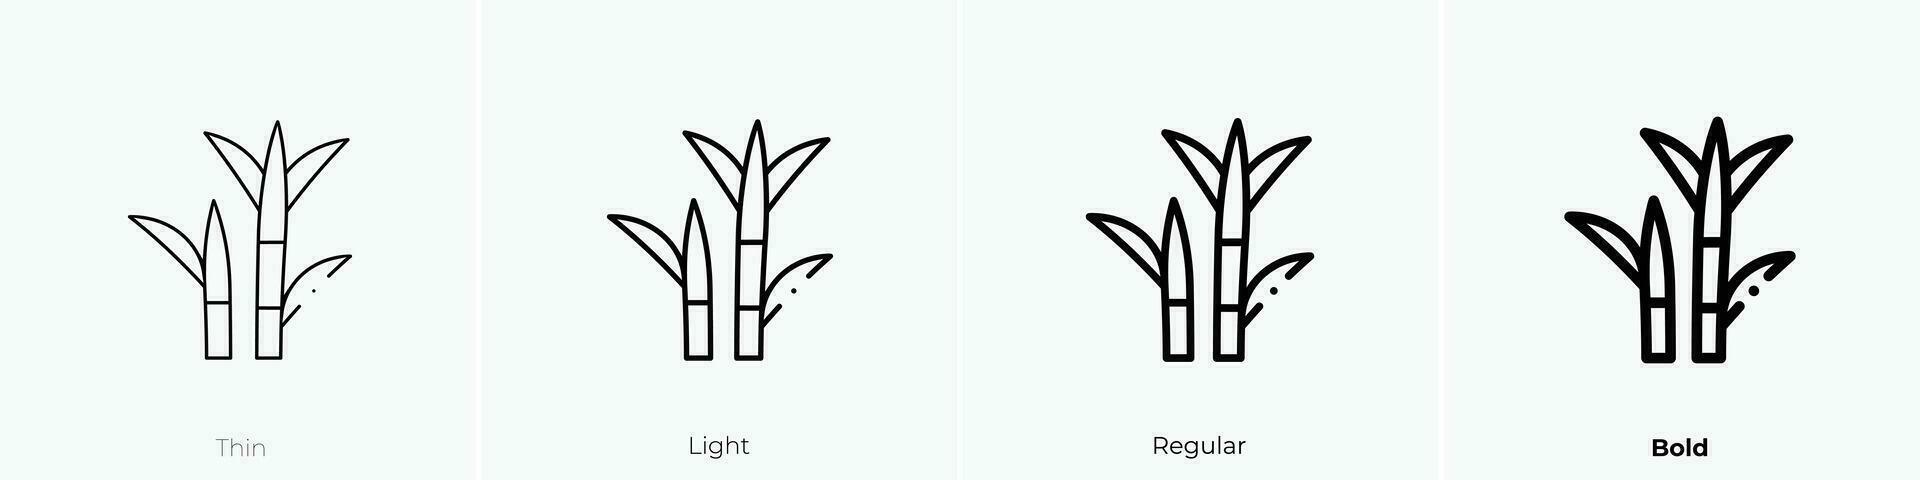 sugar cane icon. Thin, Light, Regular And Bold style design isolated on white background vector